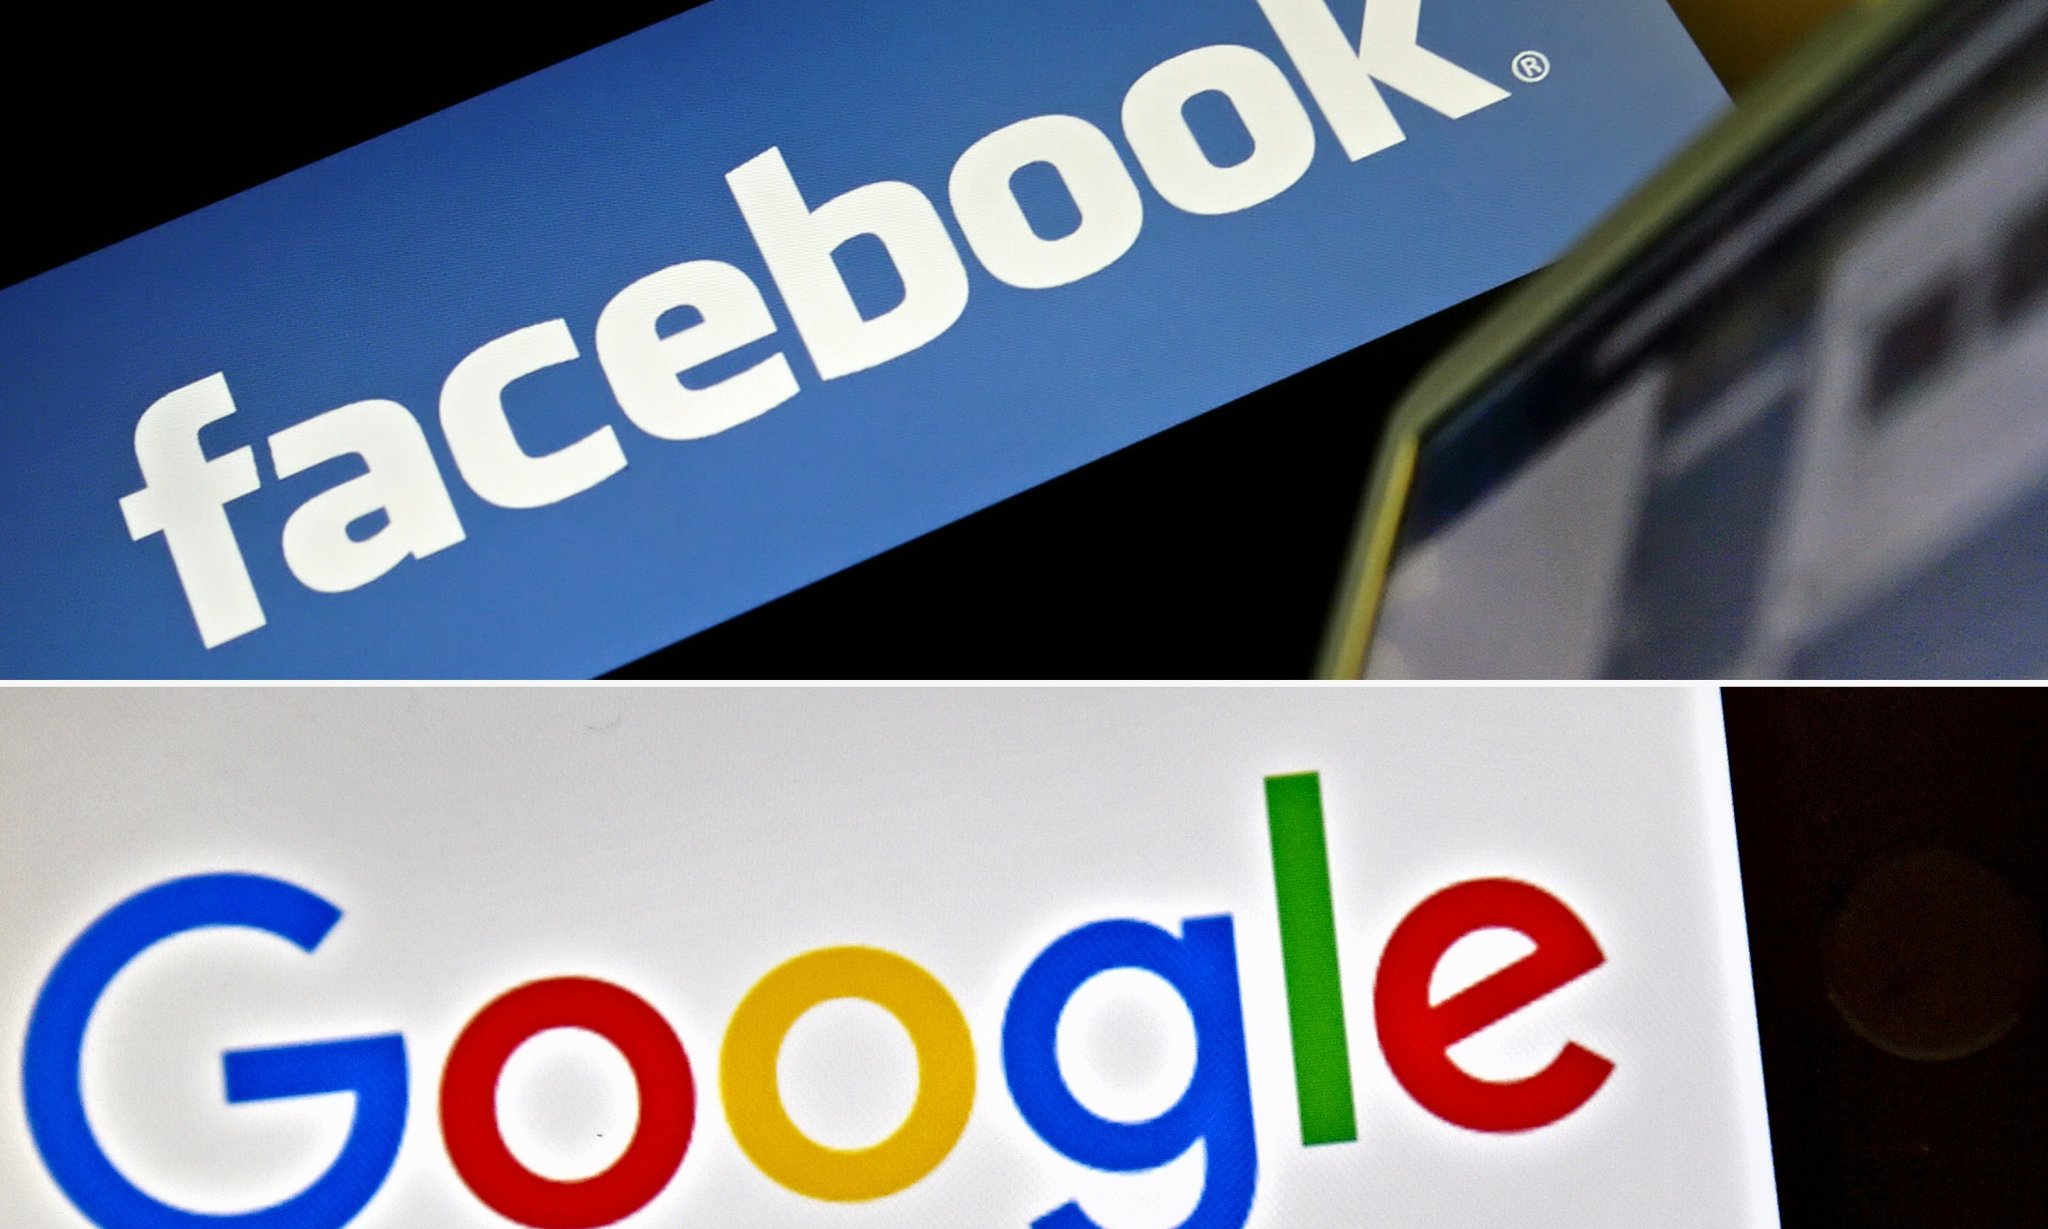 Facebook and Google antitrust investigations: all you need to know